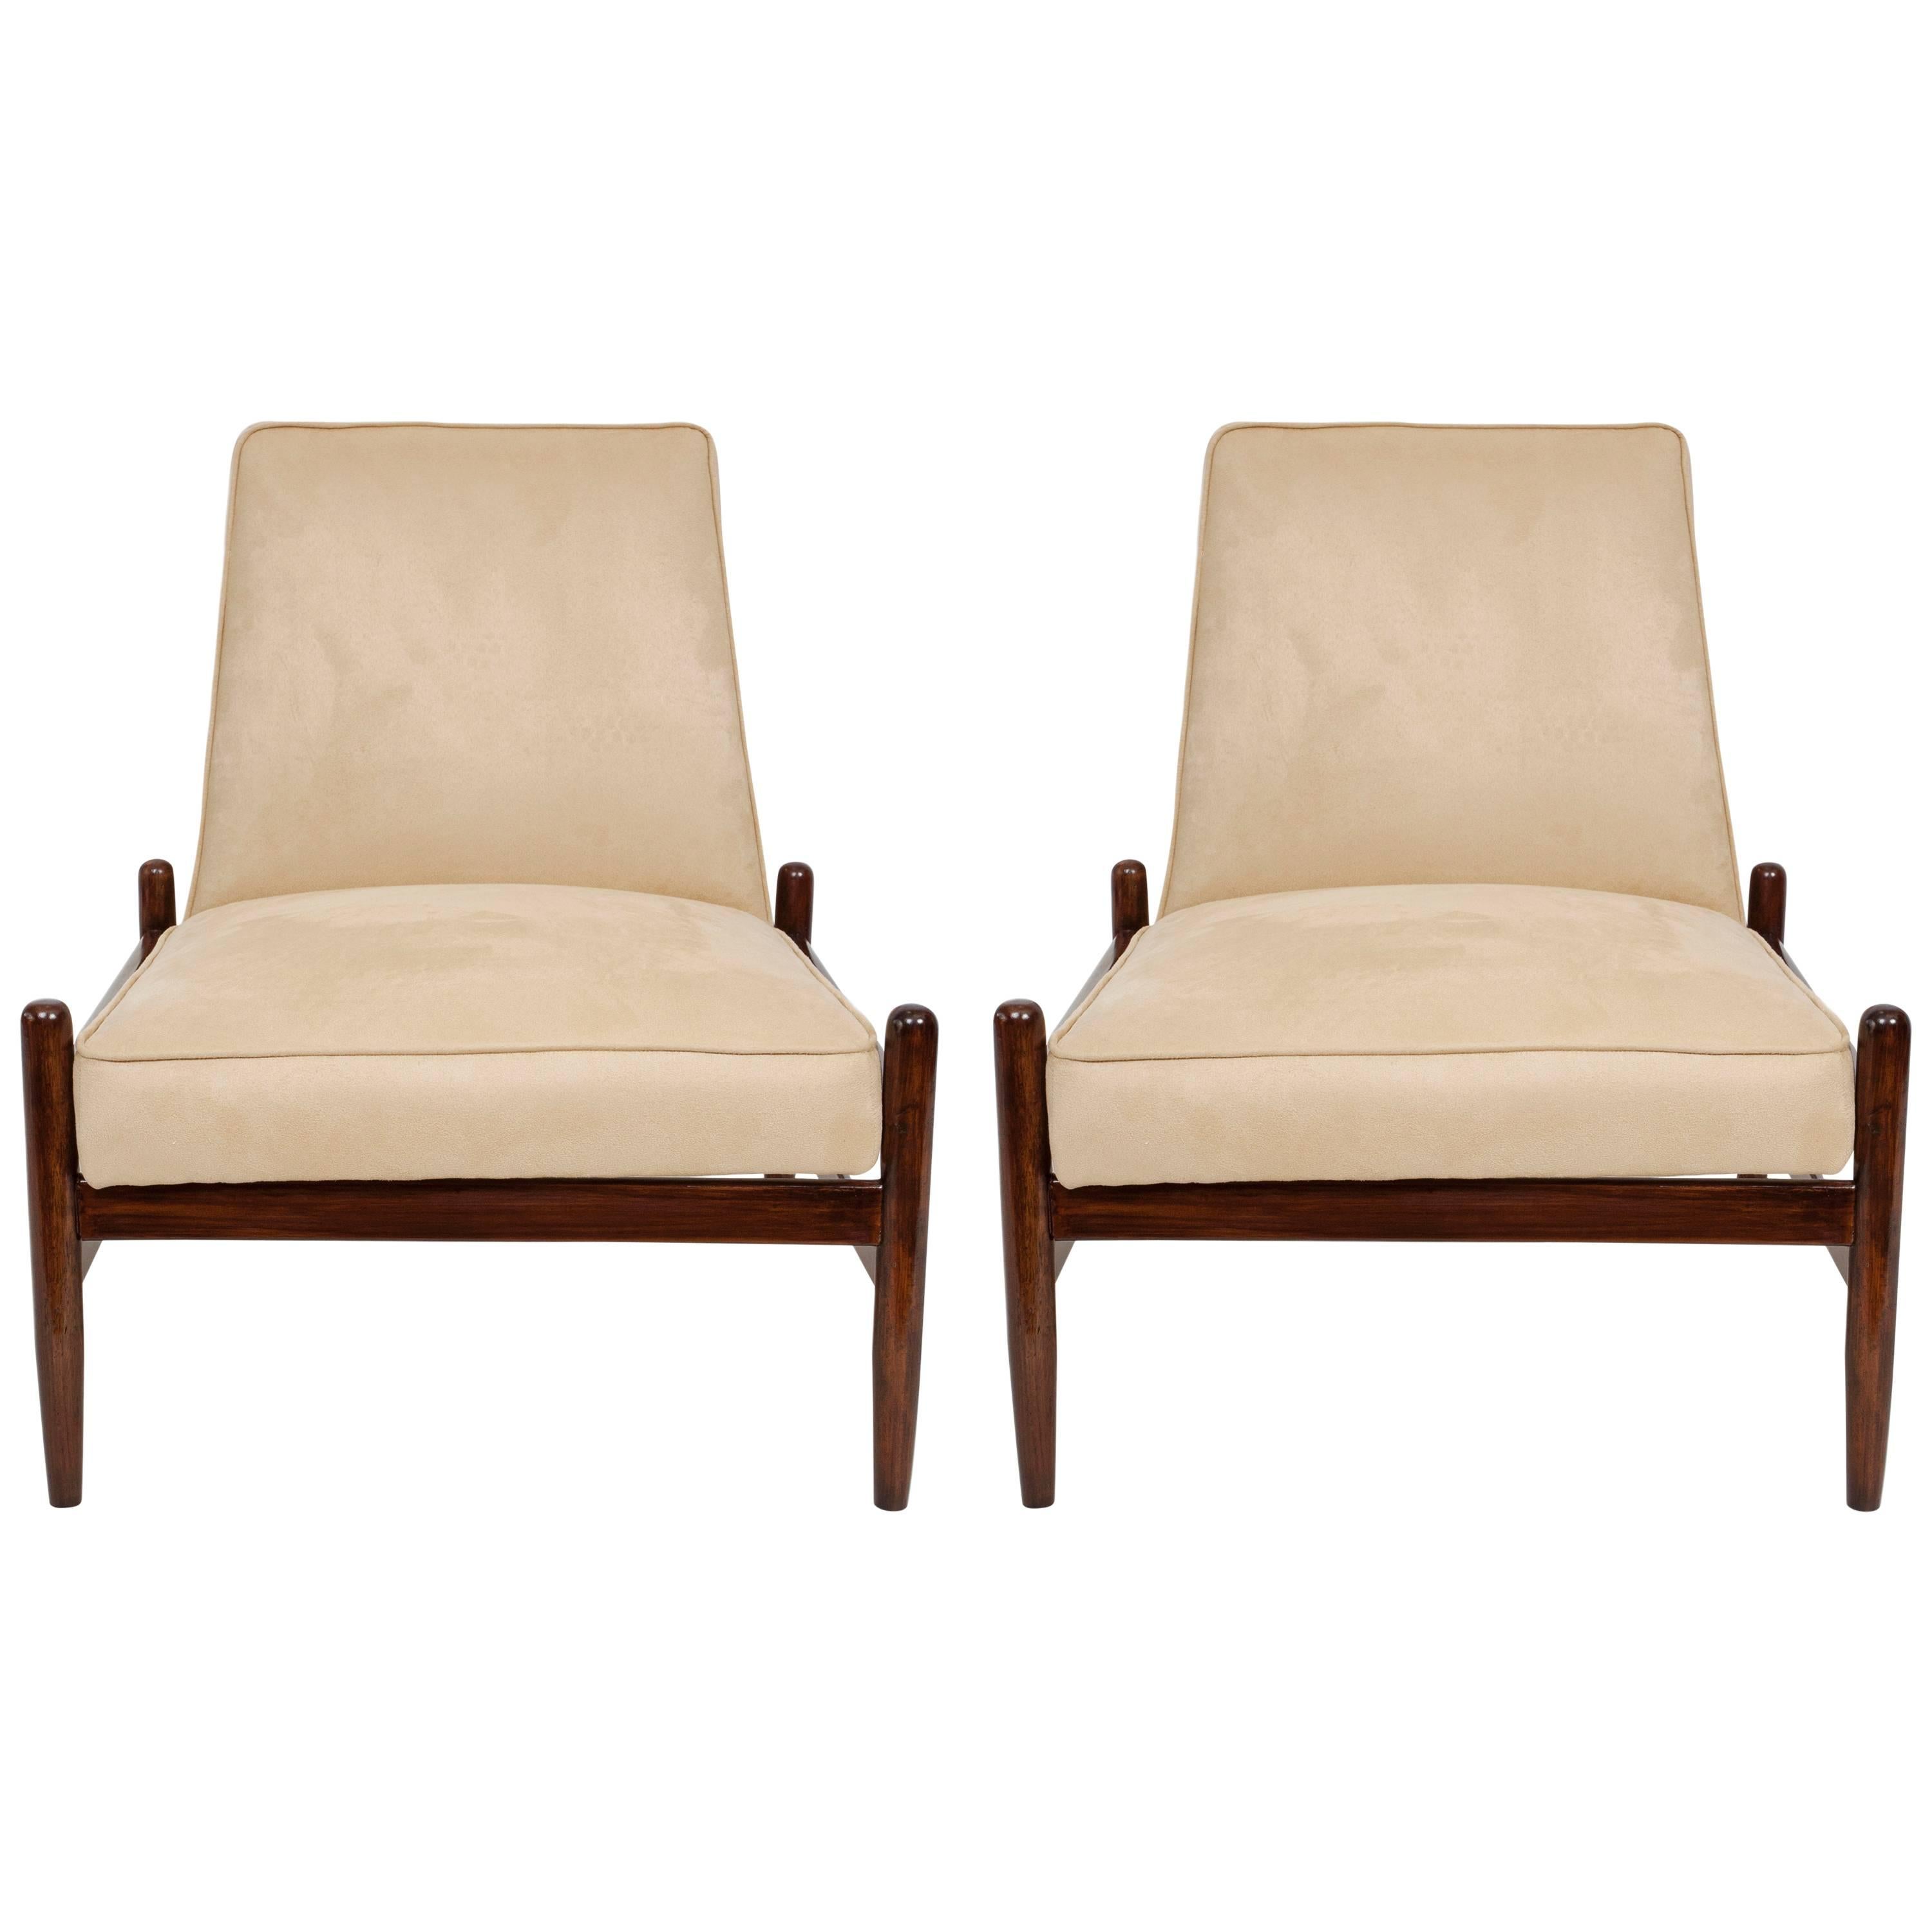 A pair of Brazilian modern lounge chairs, produced circa 1960s by Liceu de Artes & Oficios, back and seat upholstered in light beige faux suede, on jacaranda wood frames. Very good vintage condition, recently reupholstered.

10834